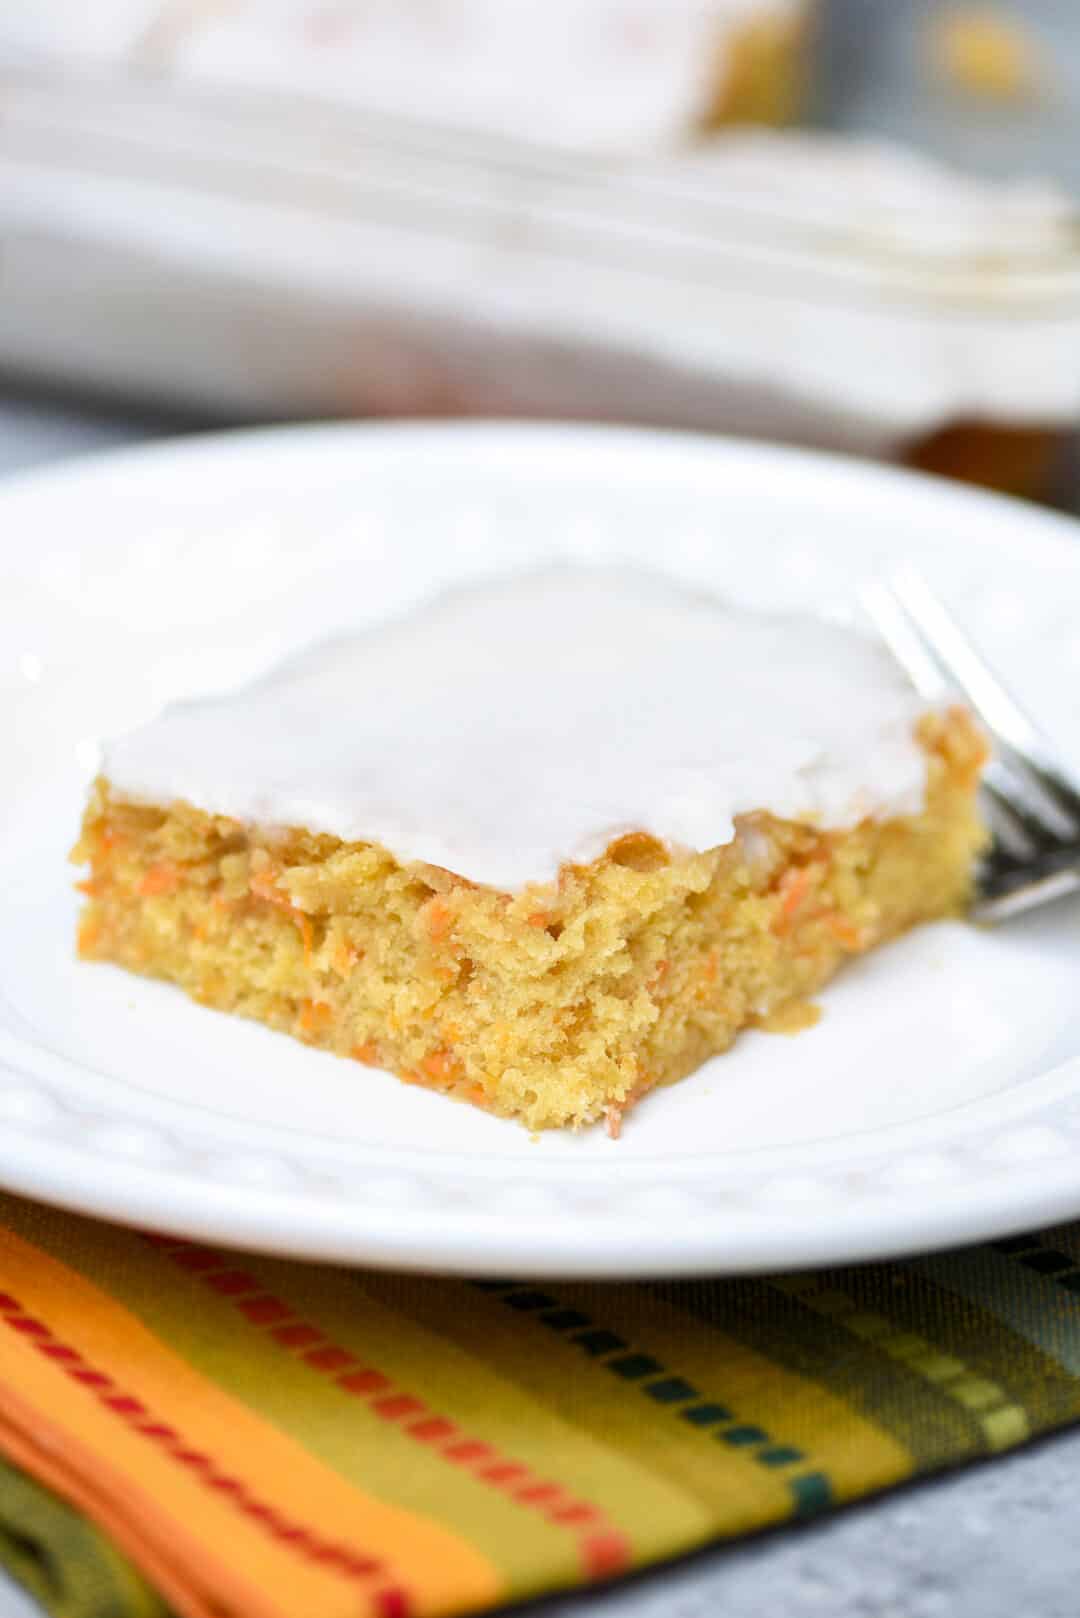 This Golden Yam Cake has an extremely moist and delicate texture and is topped with a simple powdered sugar icing that complements it perfectly. 